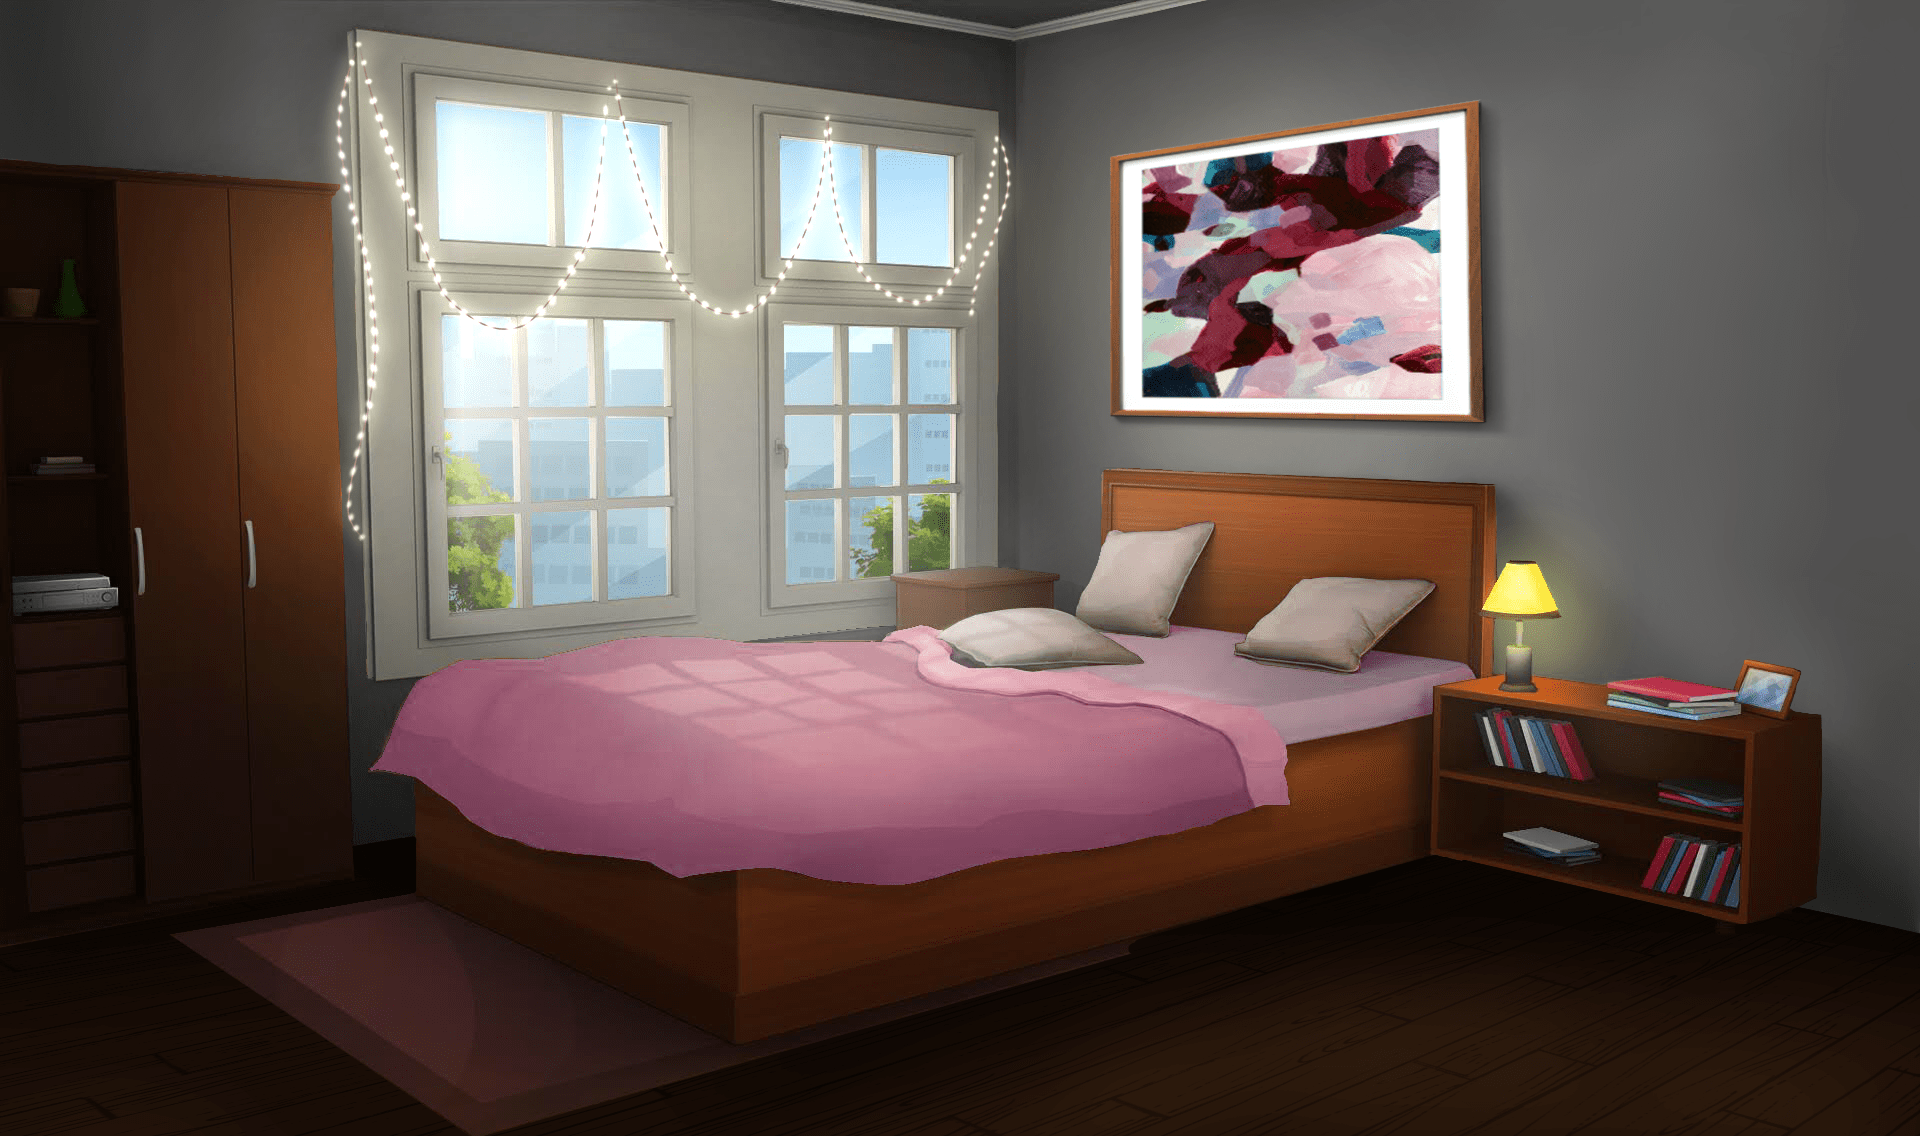 Bed Room  Night  Visual Novel Background by giaonp on DeviantArt   Episode interactive backgrounds Anime house Bedroom night